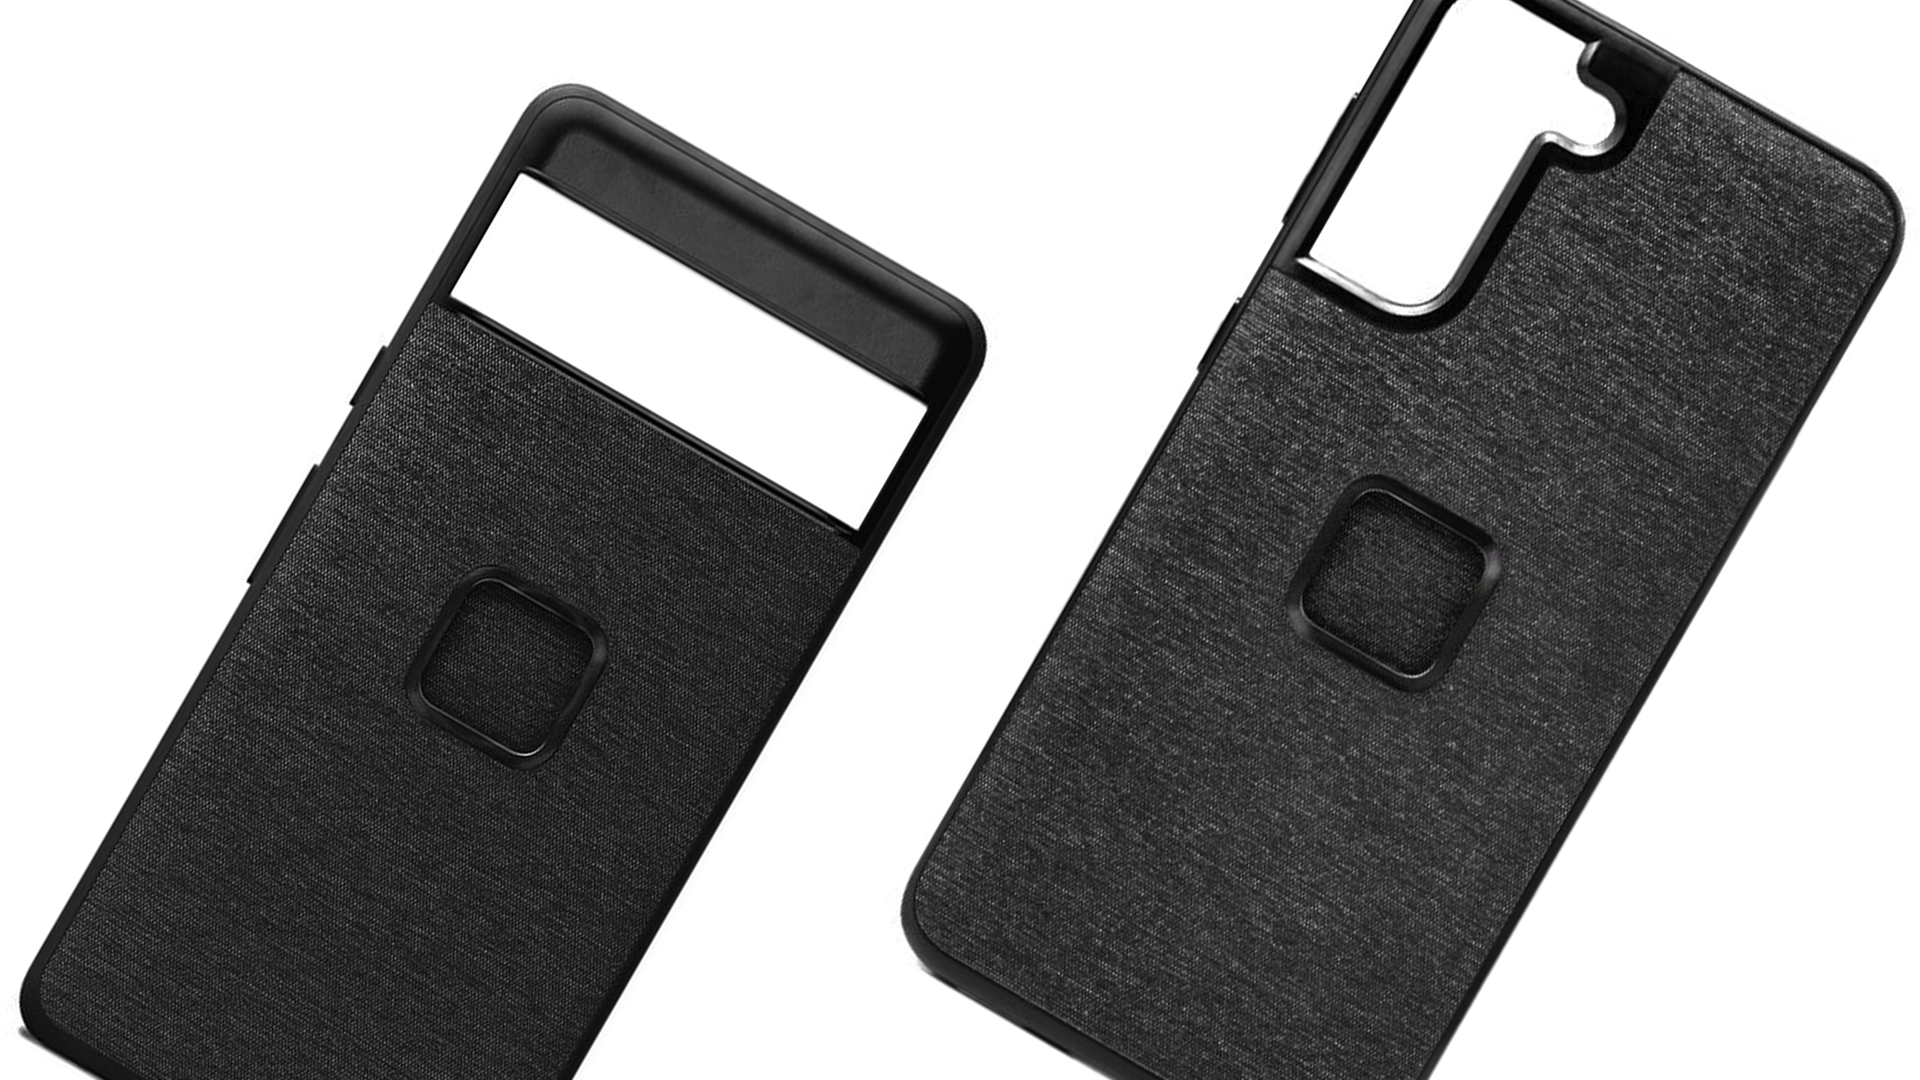 Peak Design's MagSafe-compatible cases for Google Pixel and Samsung Galaxy.